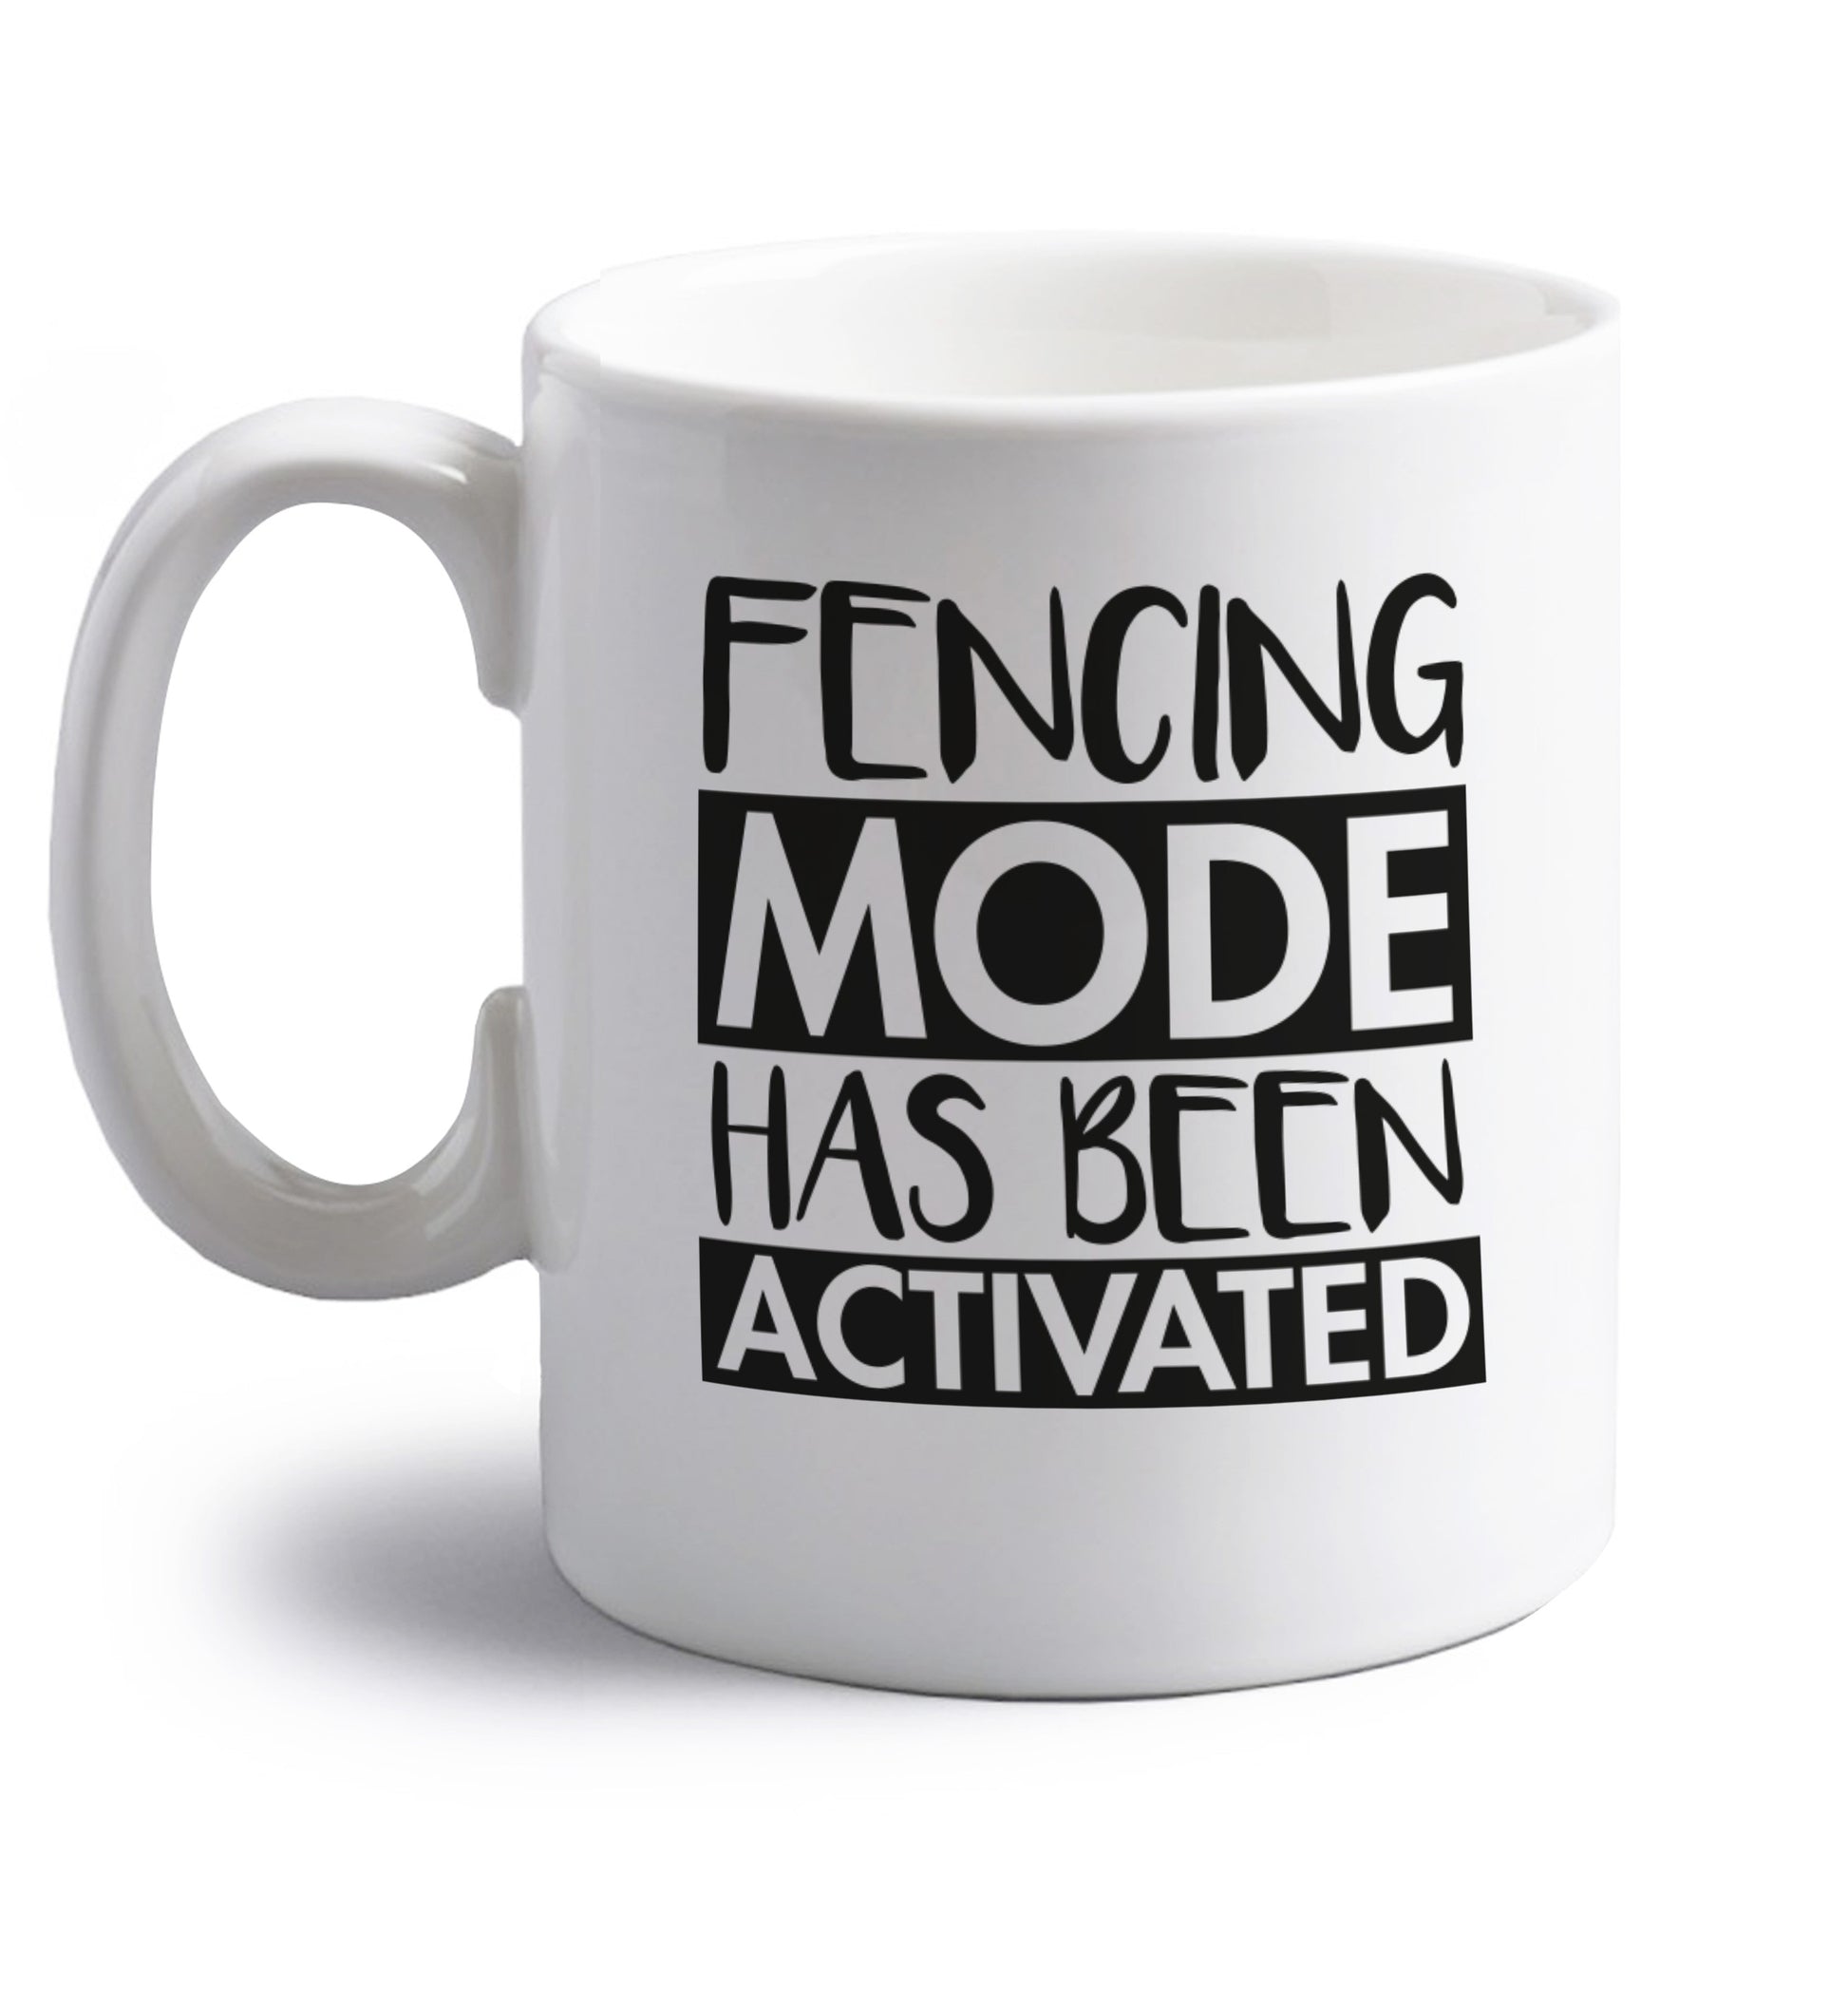 Fencing mode activated right handed white ceramic mug 